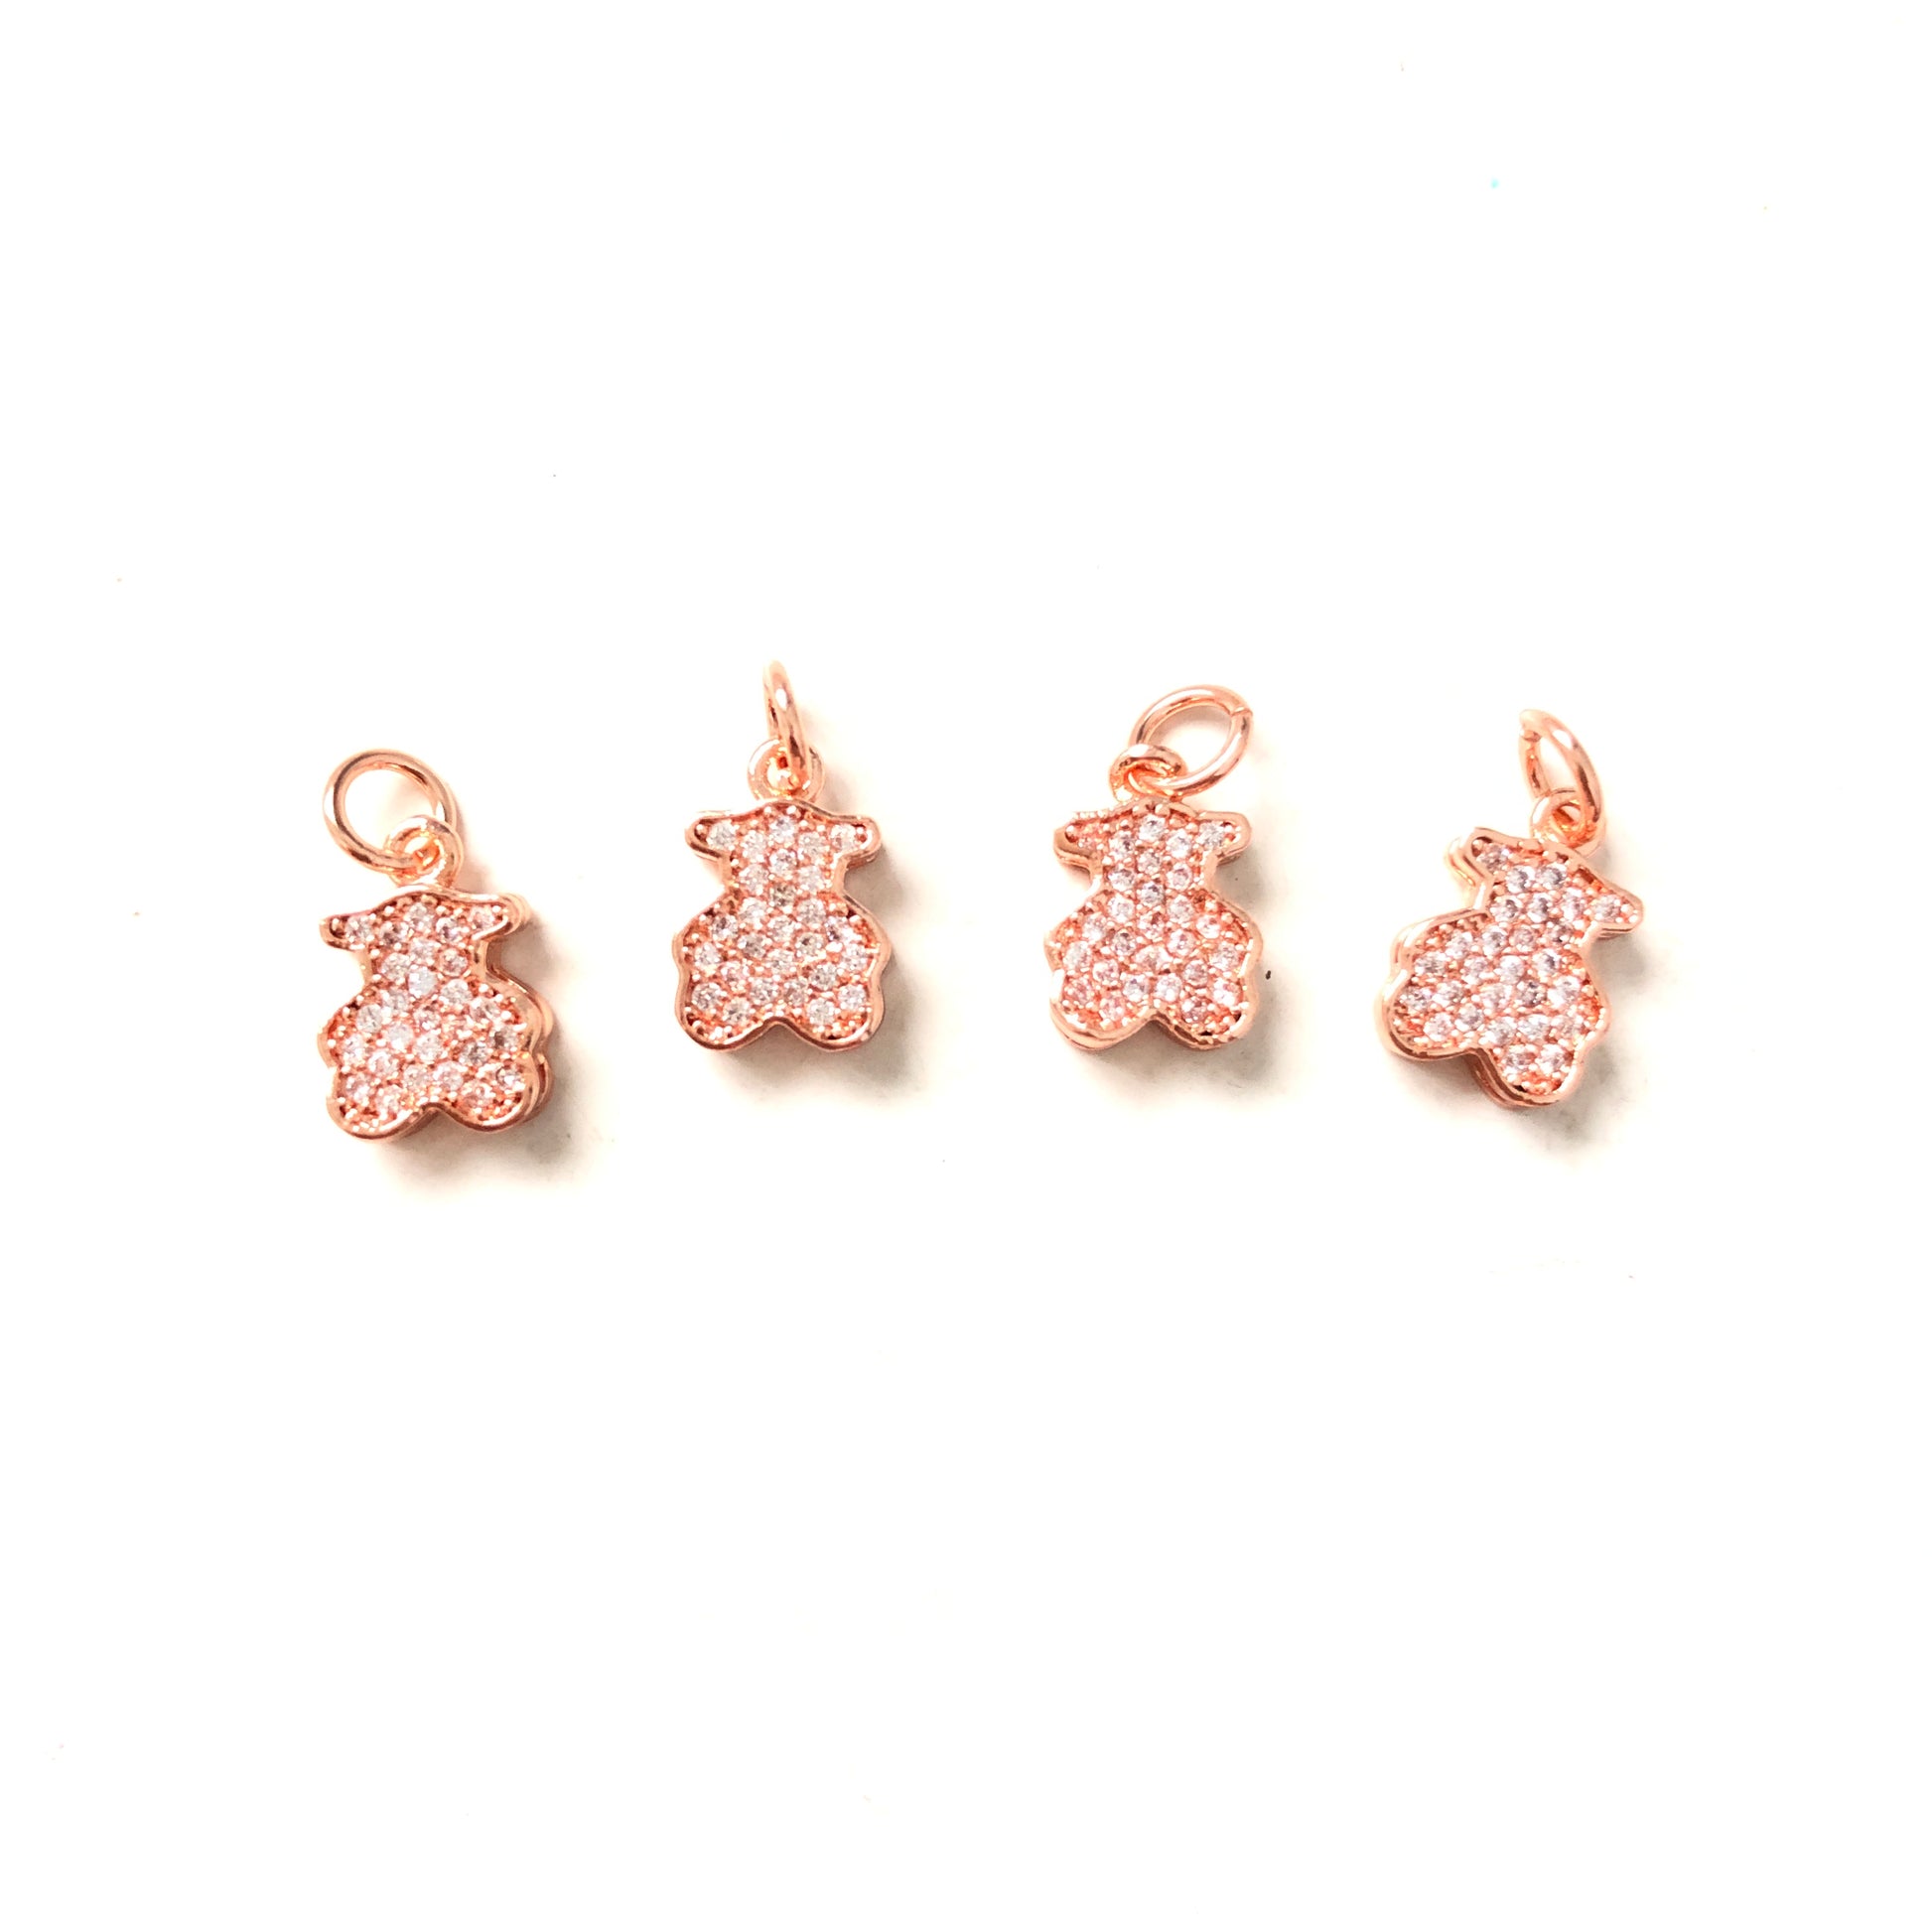 10pcs/lot 12*8mm CZ Paved Bear Charms Rose Gold CZ Paved Charms Animals & Insects Small Sizes Charms Beads Beyond